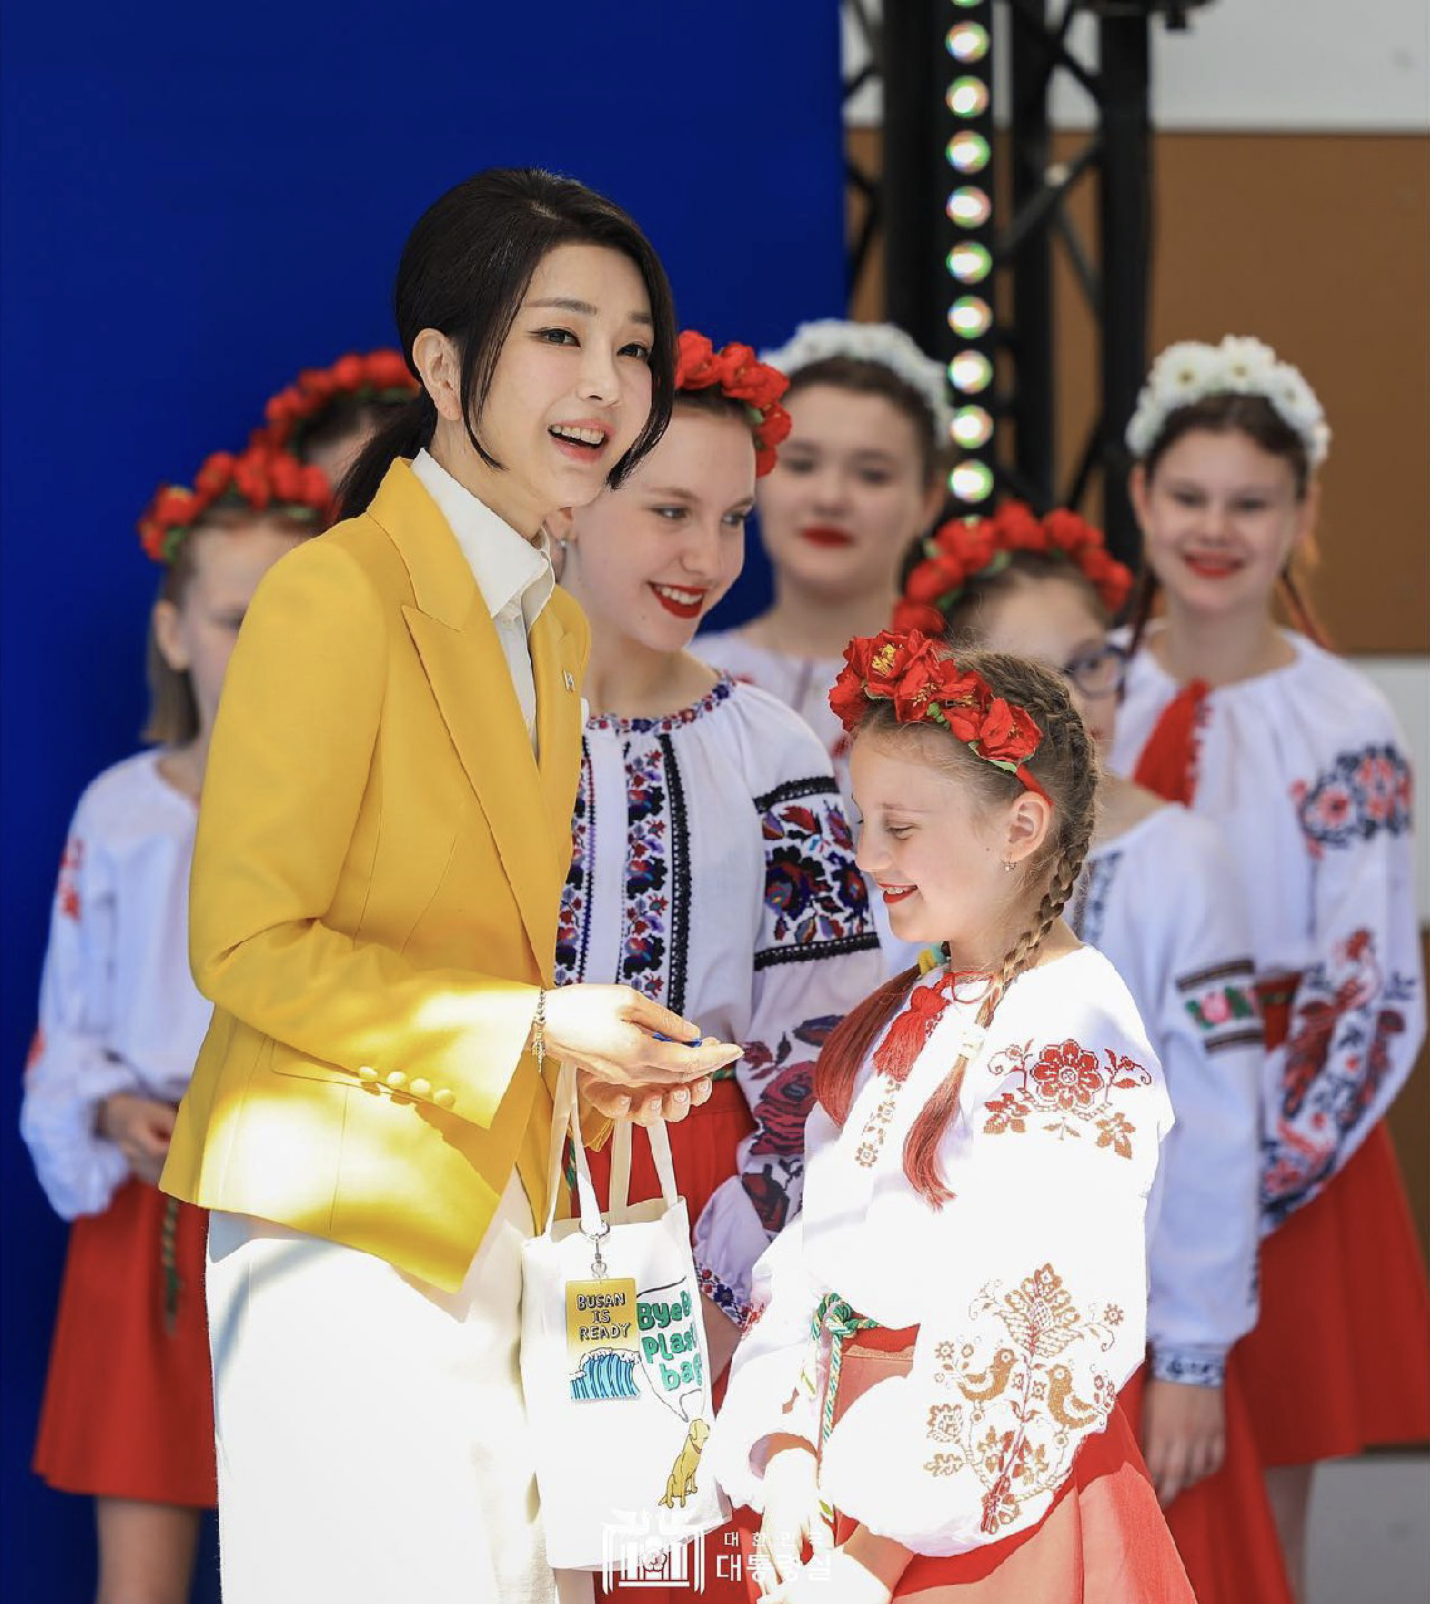 ''So beautiful. Wow'': 50-year-old first lady of the Republic of Korea impresses with her appearance during a historic visit to Ukraine